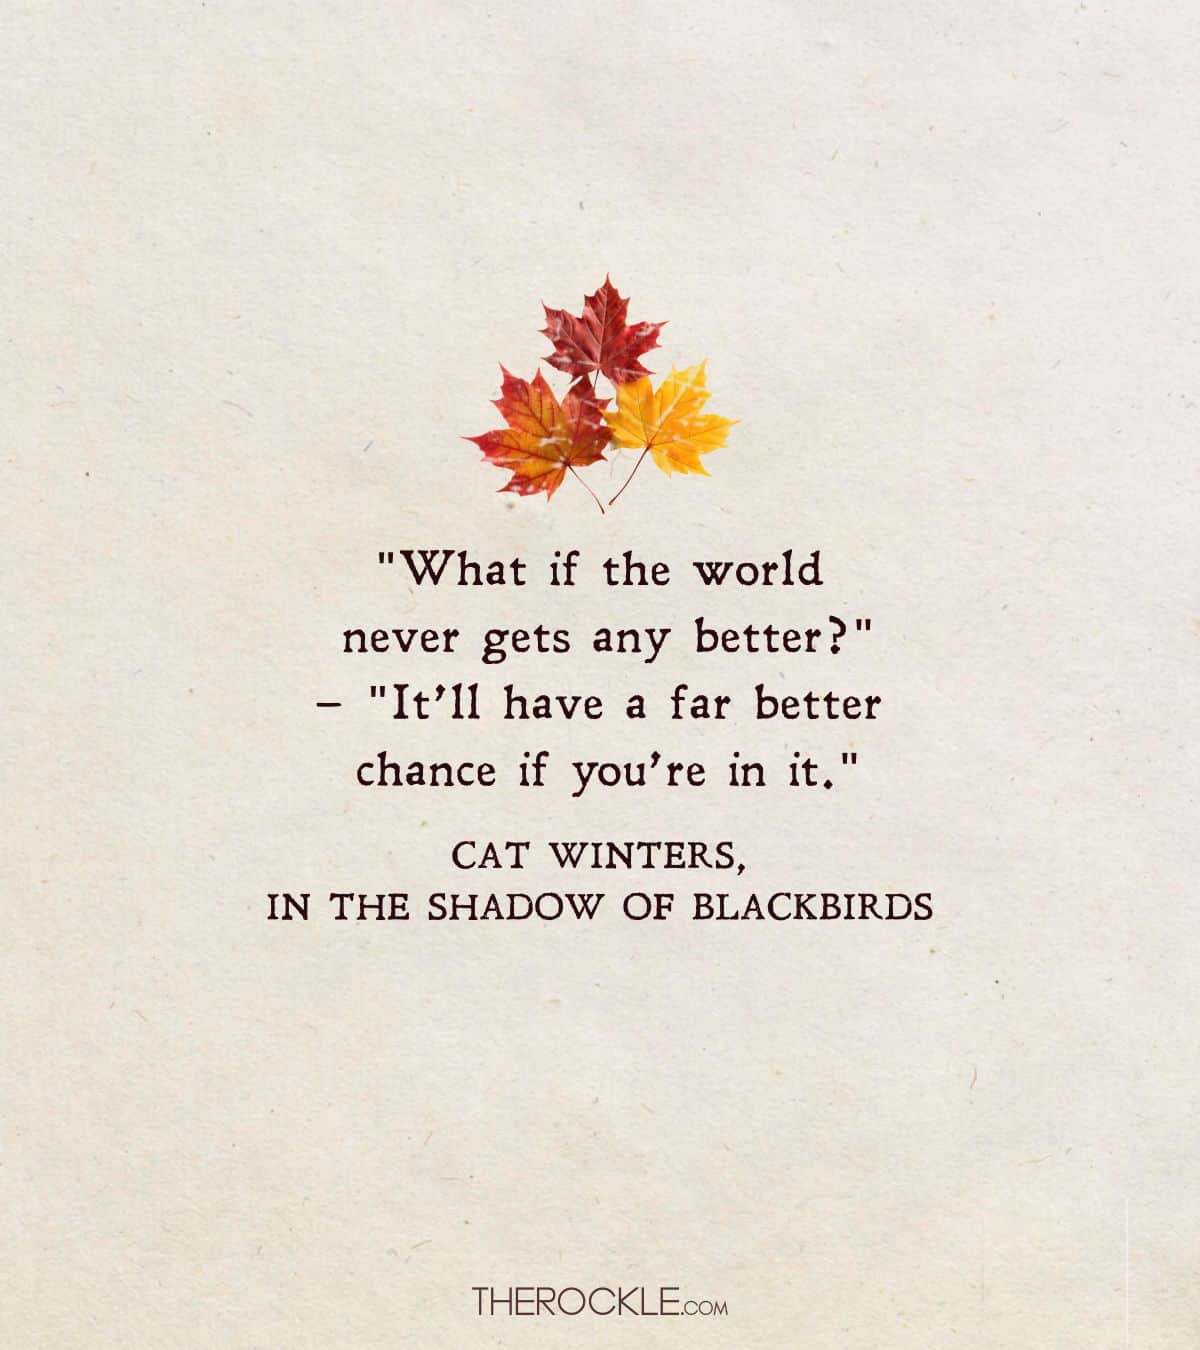 Quote from In the Shadow of Blackbirds by Cat Winters